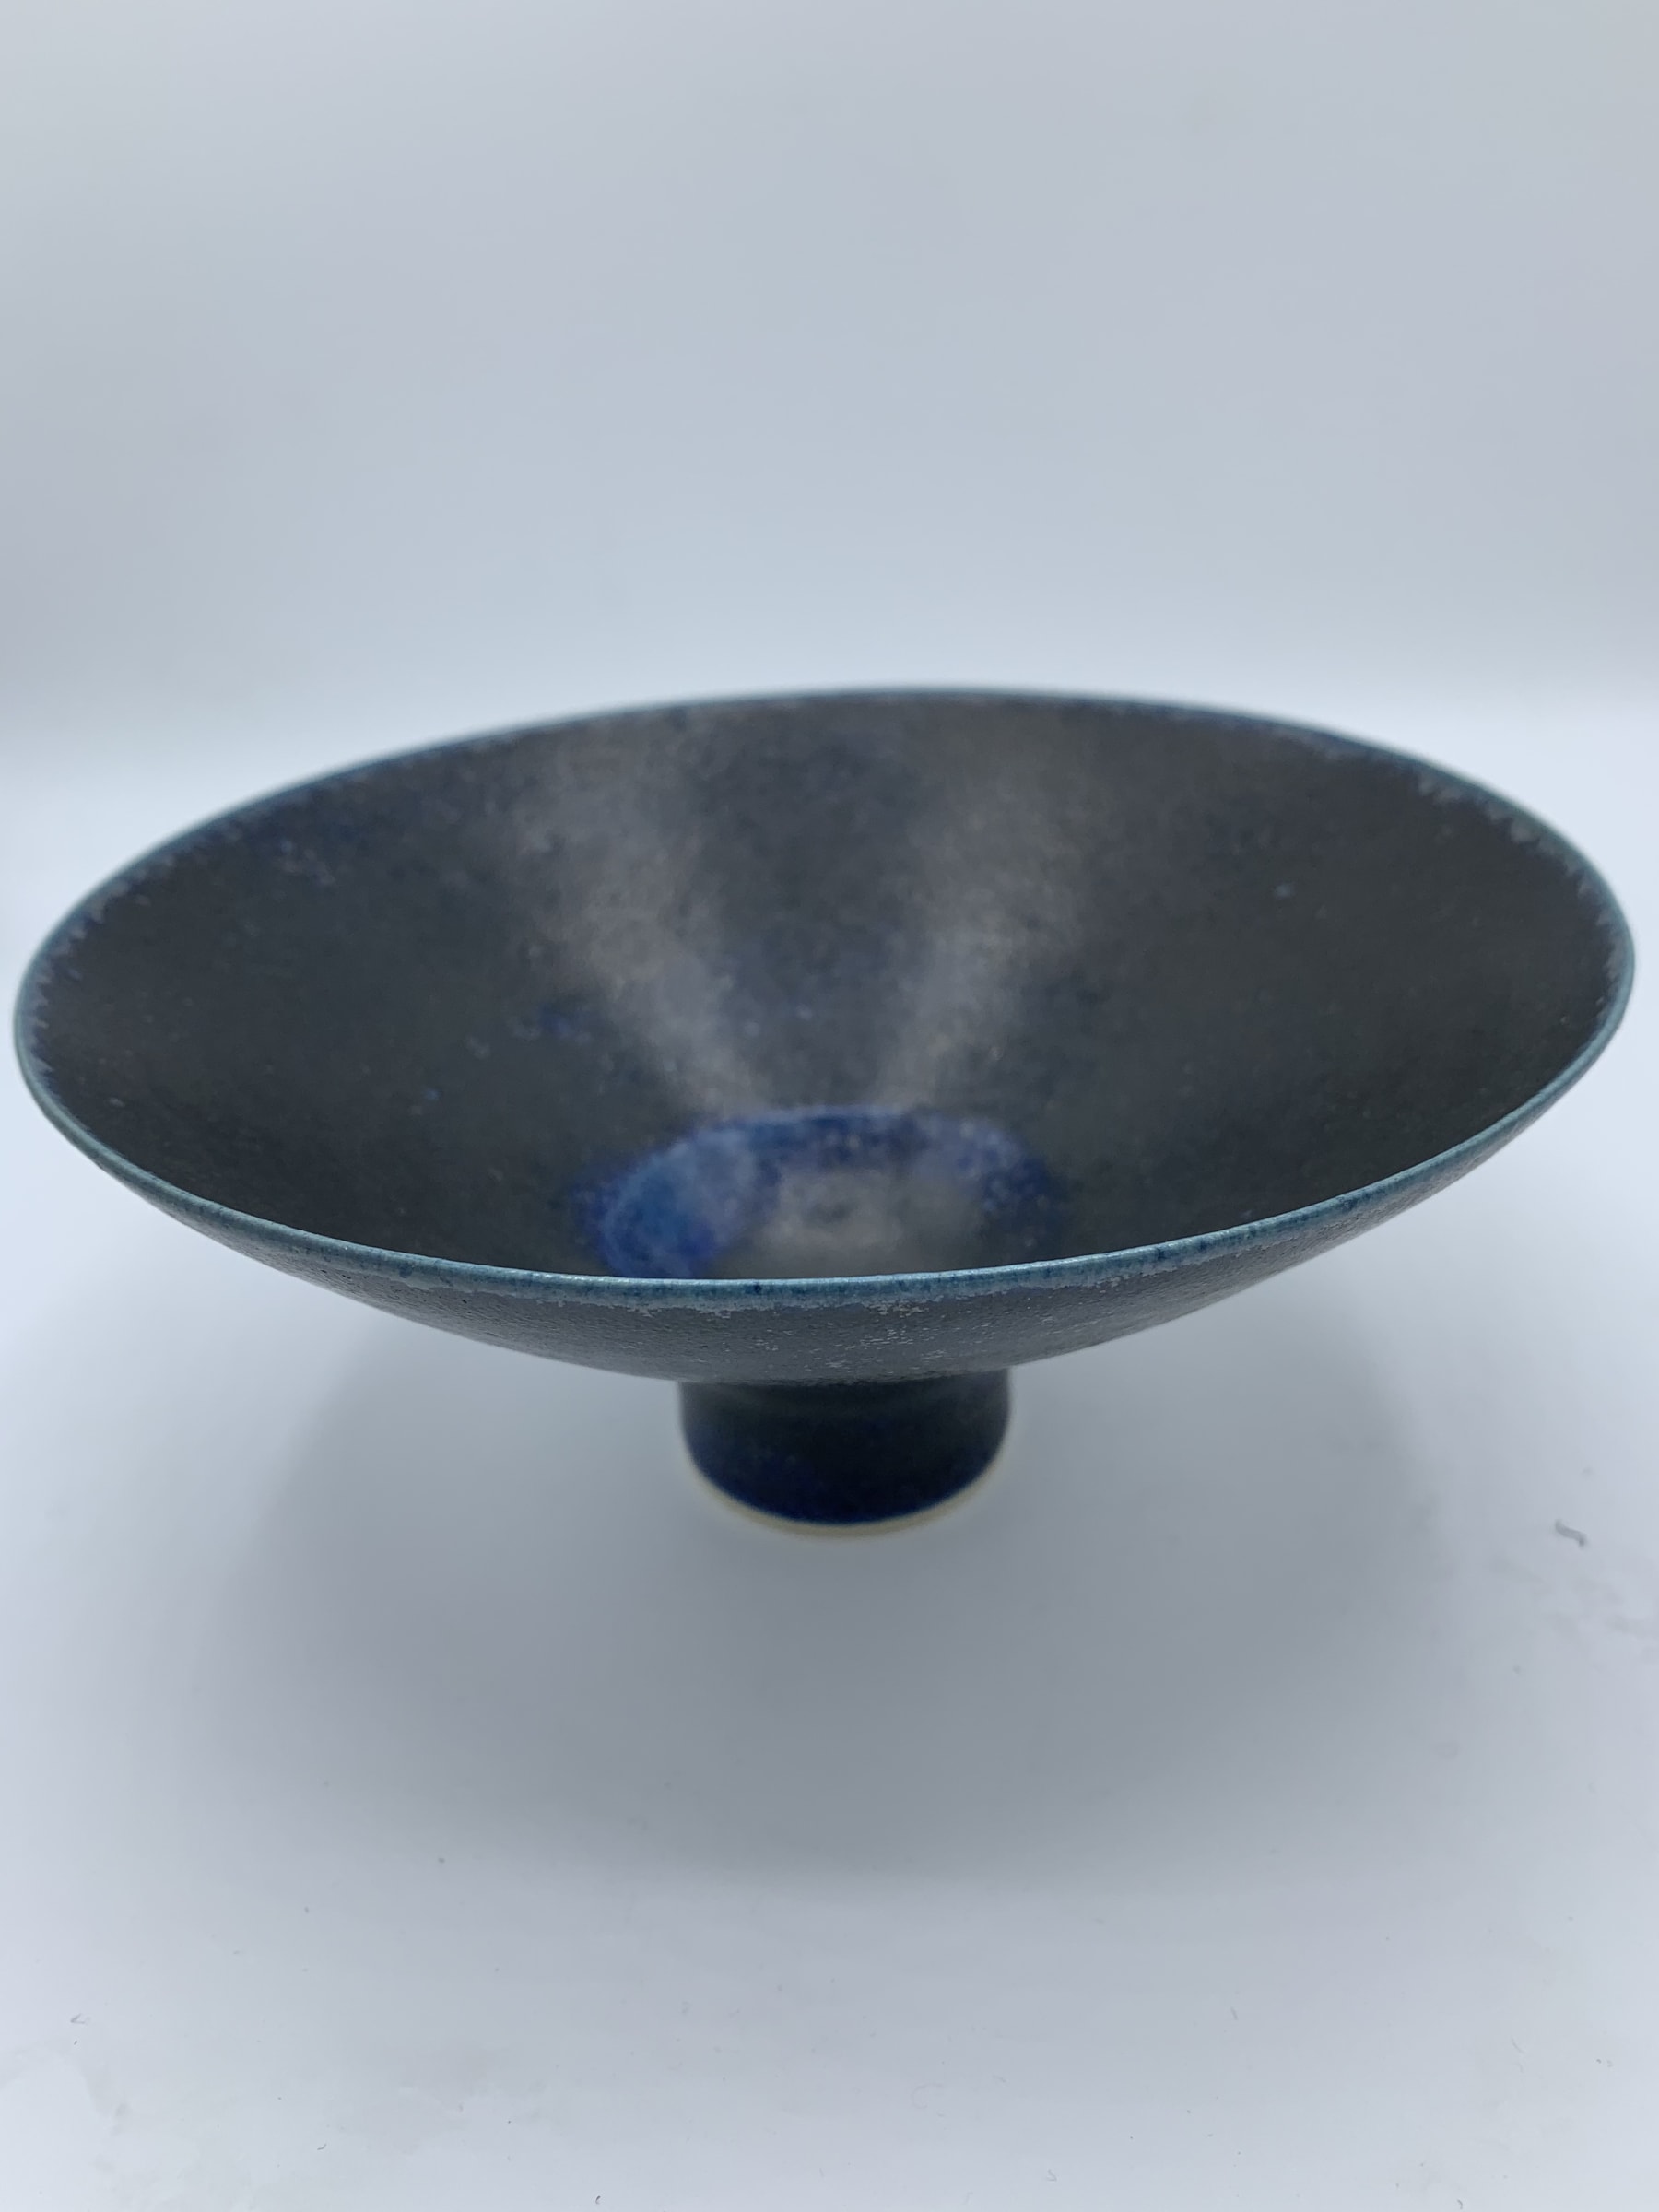 Lucie Rie, Conical Bowl Contemporary Six